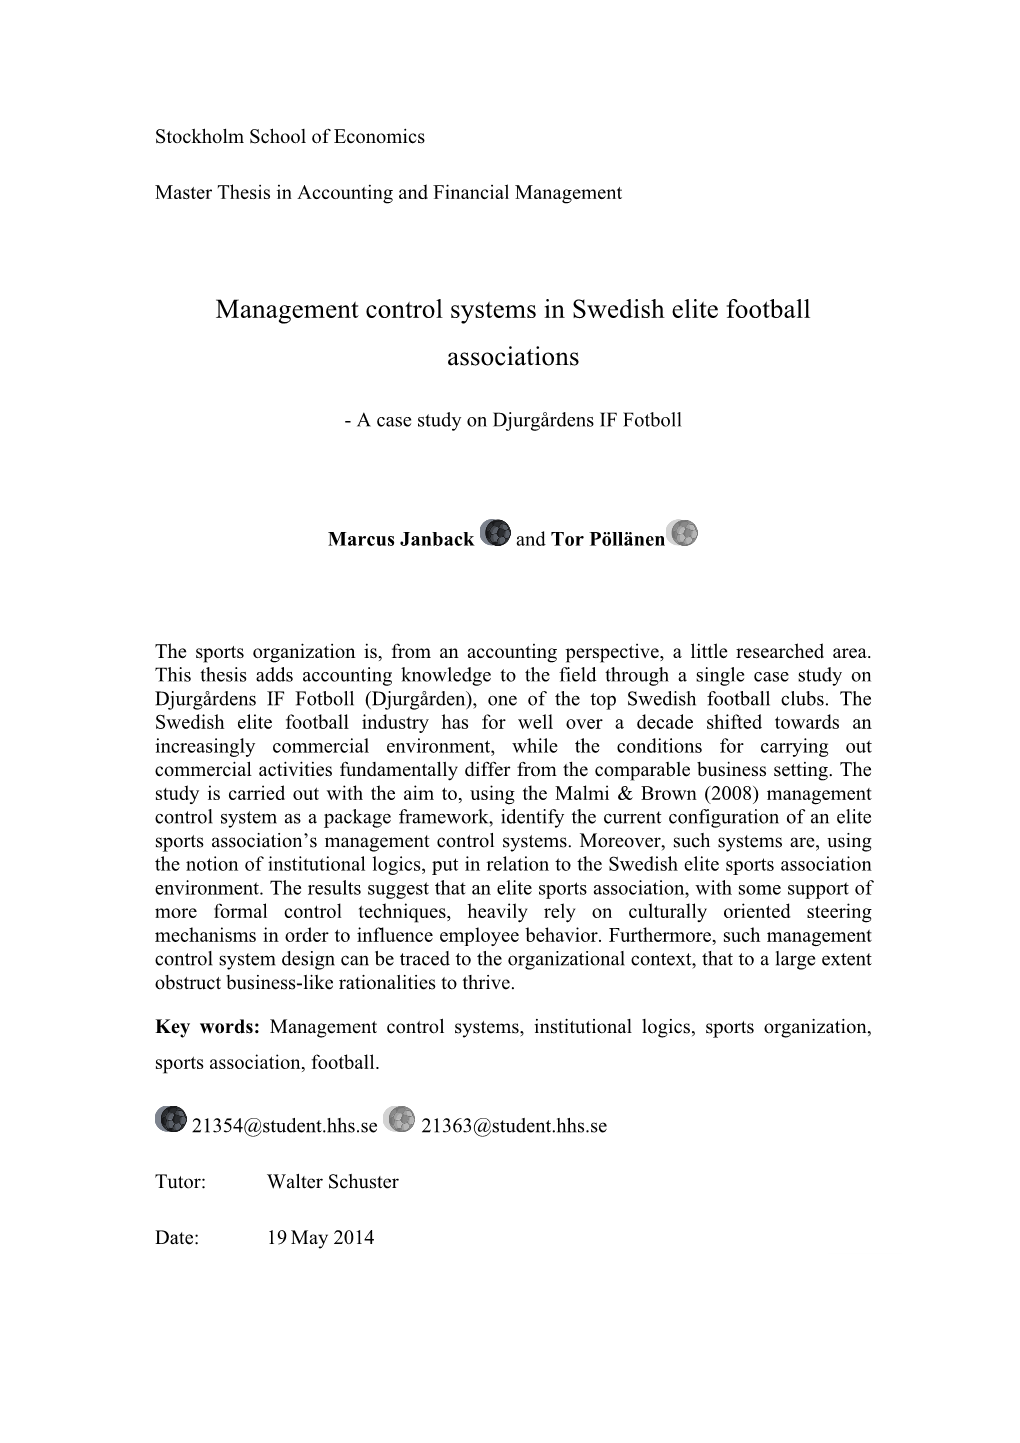 Management Control Systems in Swedish Elite Football Associations